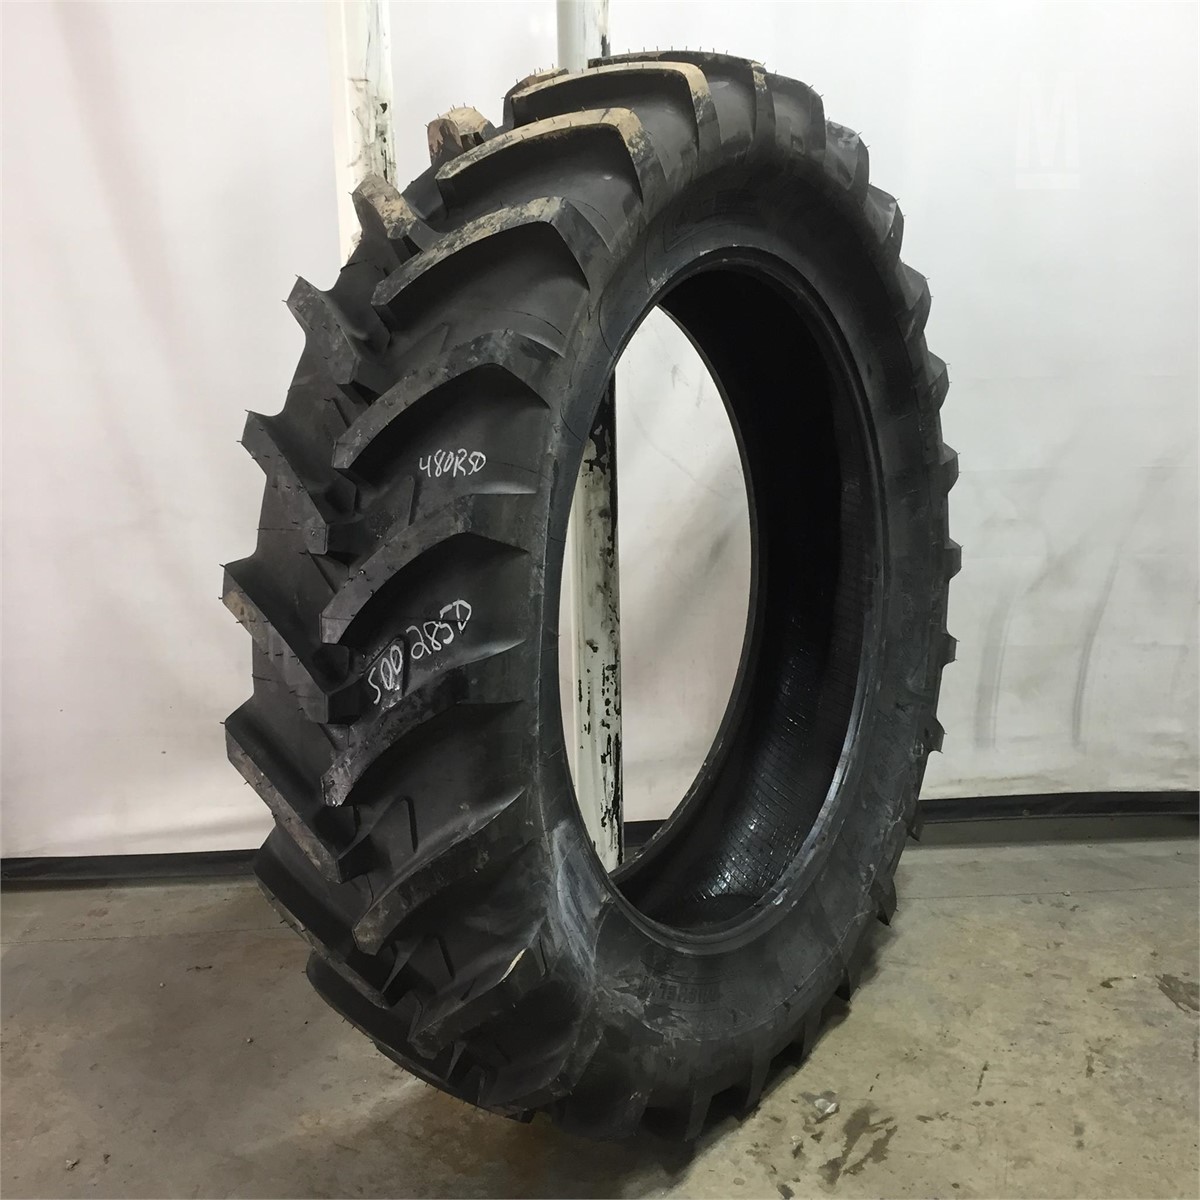 Michelin 480 80r50 Tyres For Sale In Redwood Falls Minnesota Marketbook Co Za